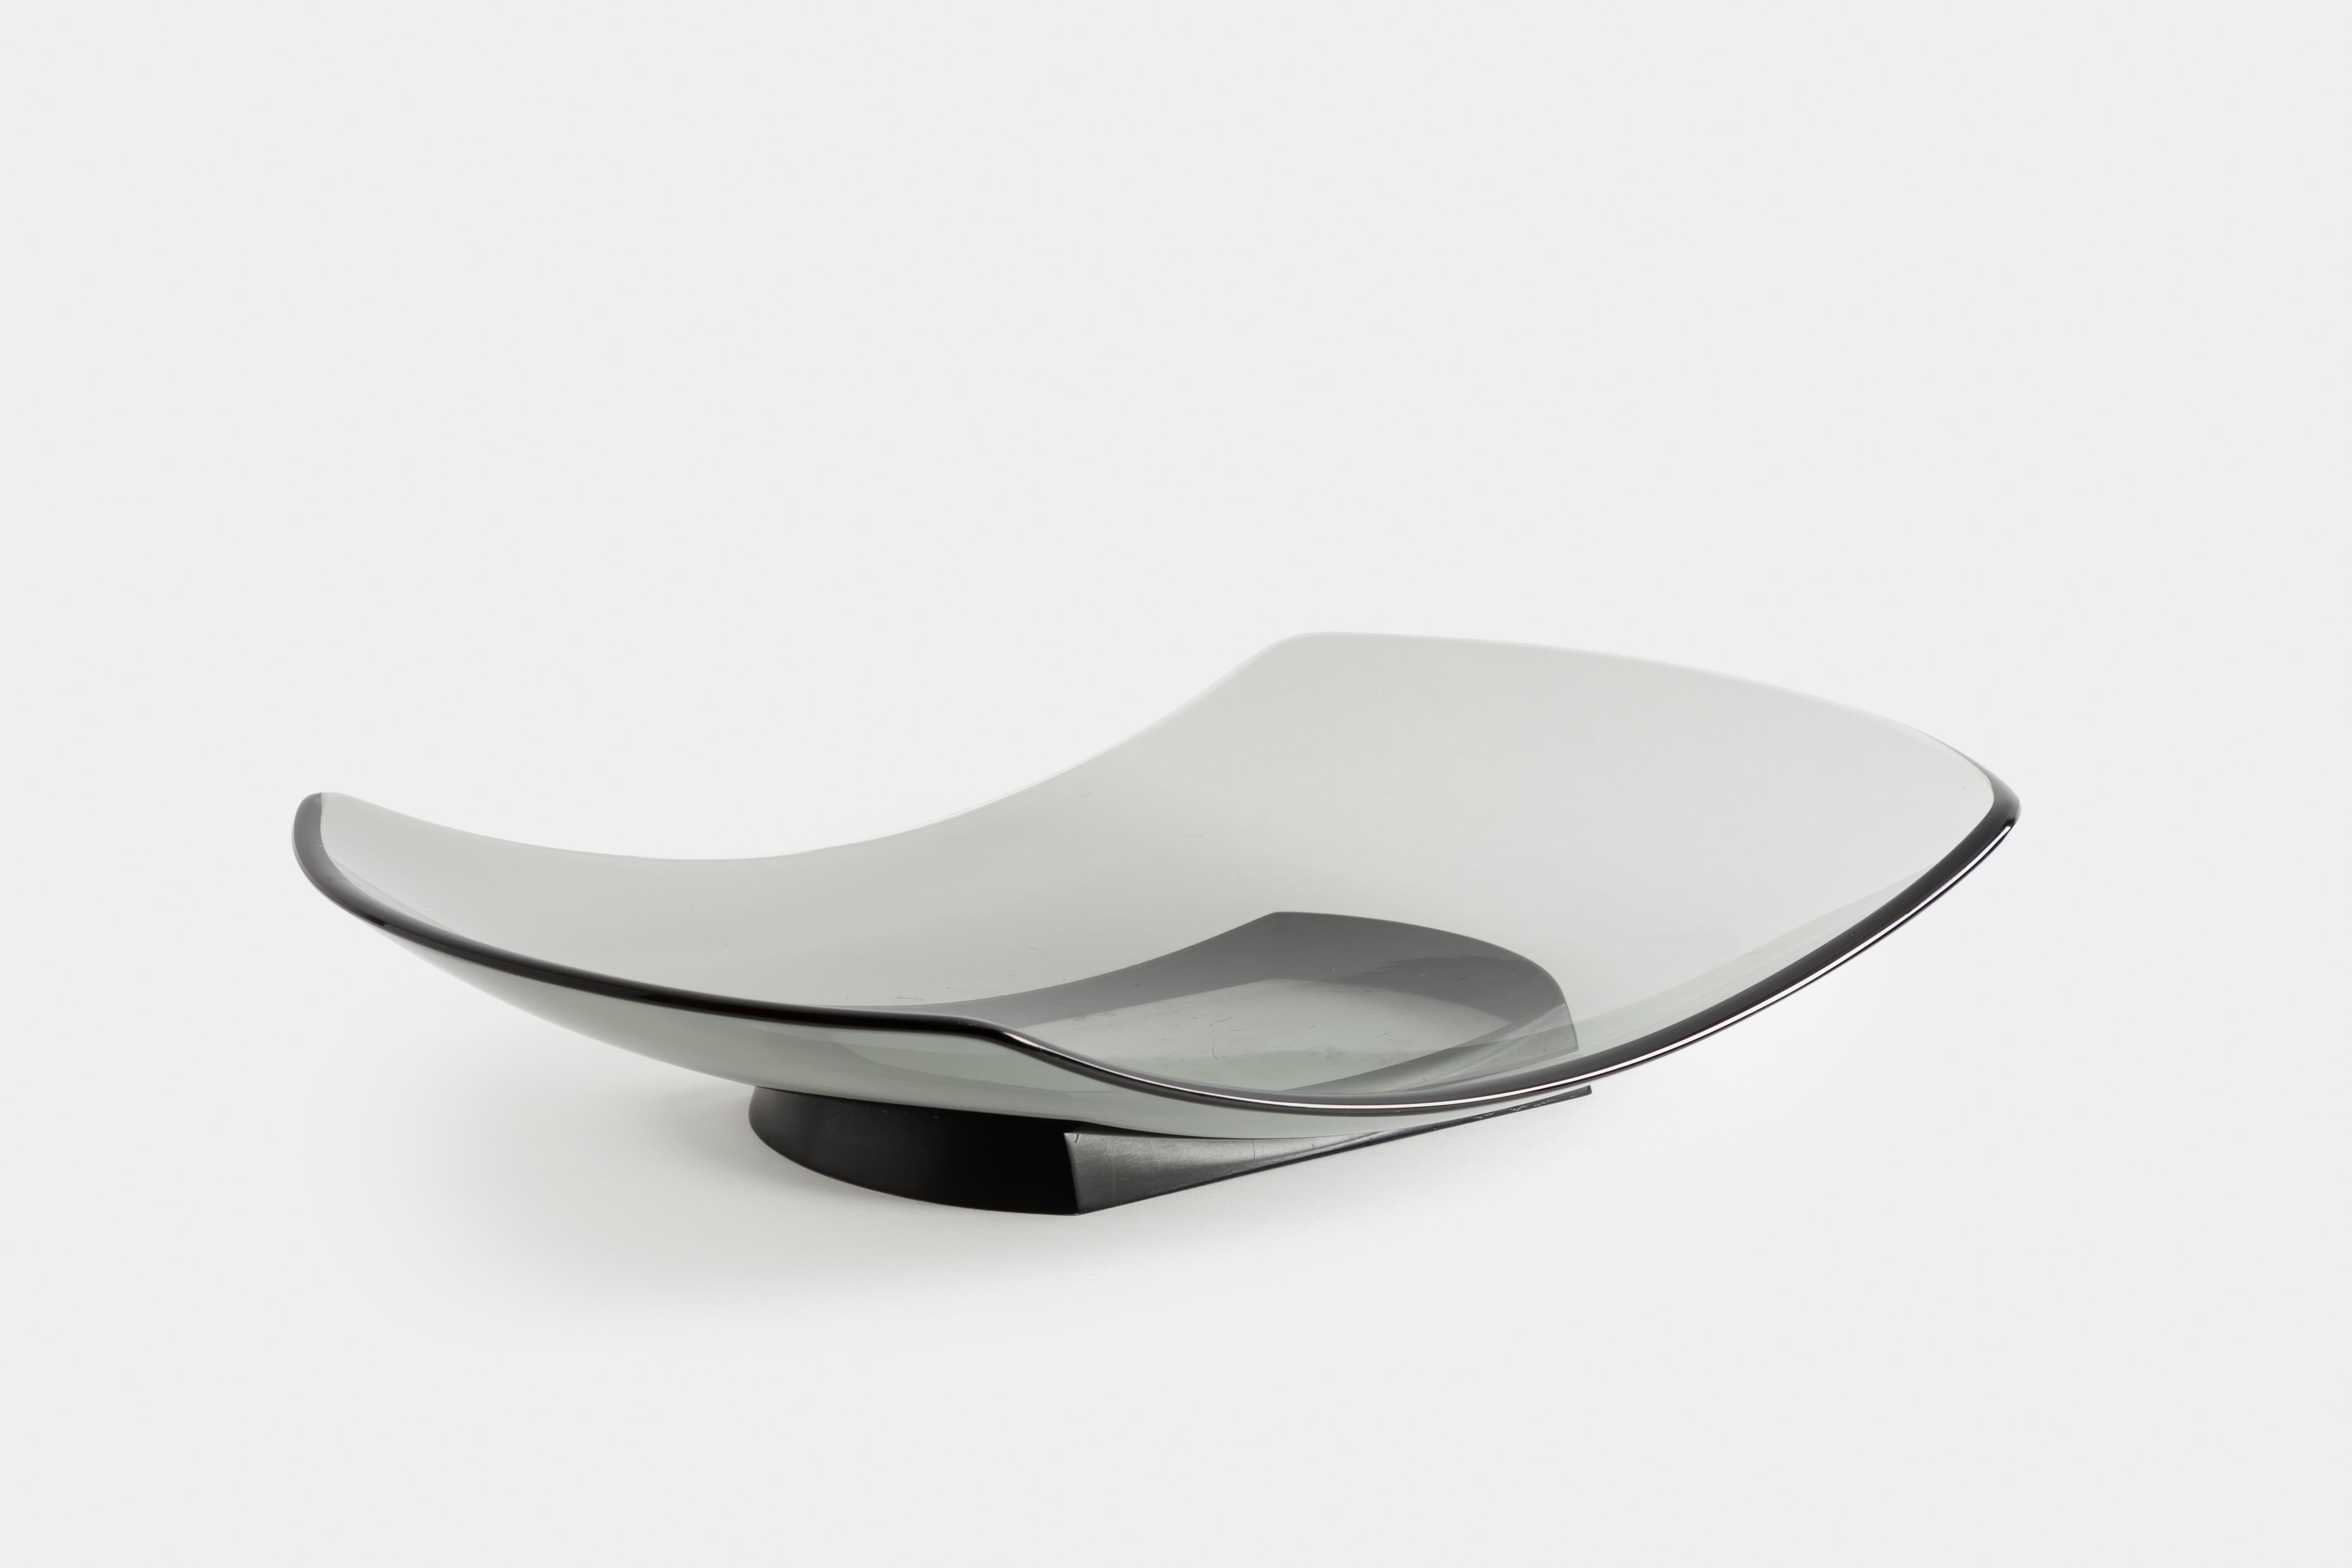 Fontana Arte large gray glass dish or centerpiece with profiled and curved glass resting on an angular fitted black enameled metal base, Italy, c. 1956.  This gray glass is a rare colorway in this model and the form is quite elegant in its curved